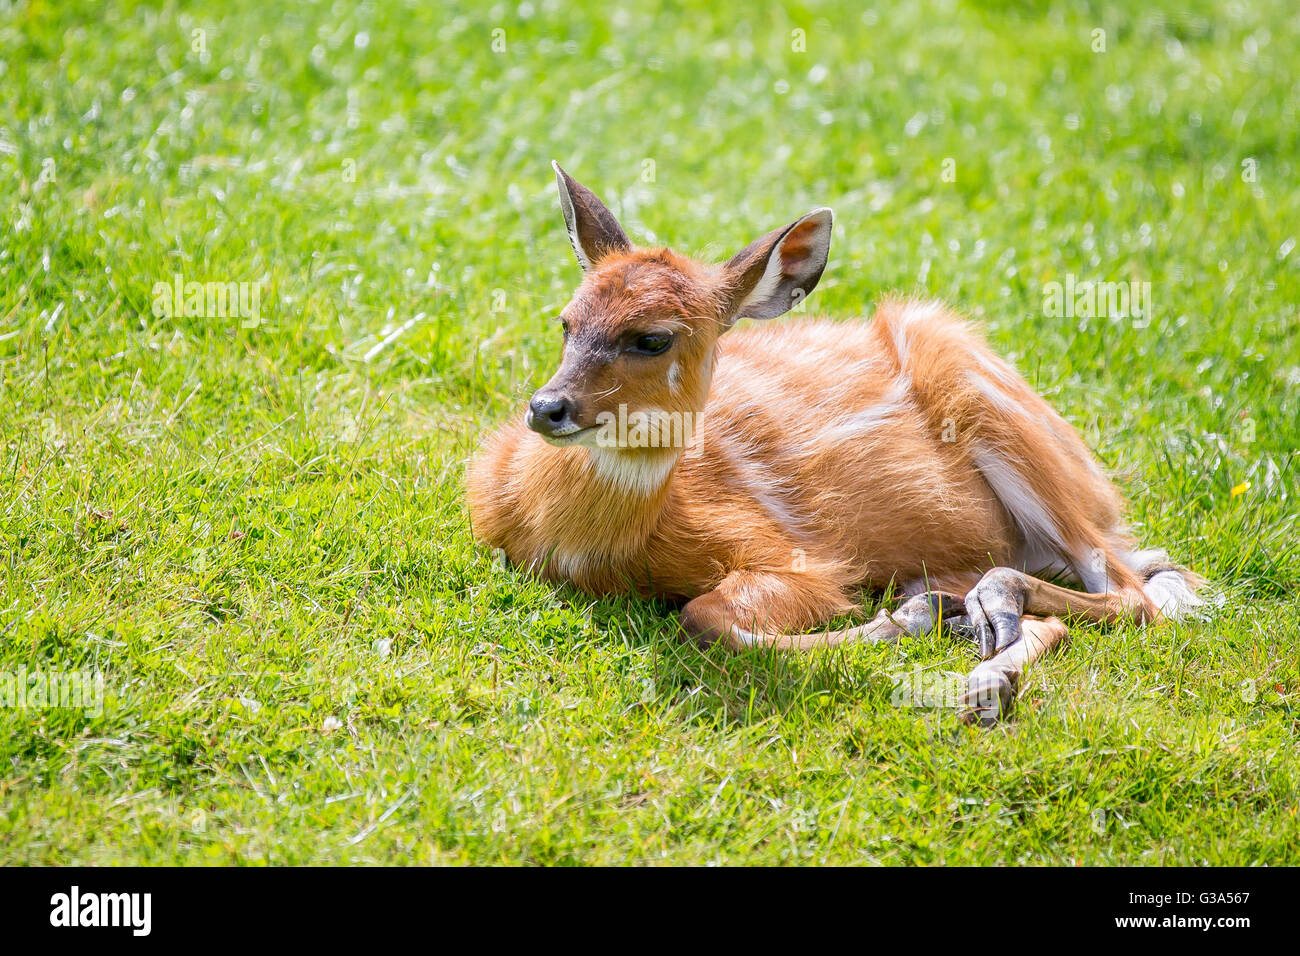 Eastern Bongos Calf deer like hooved mamal pictured on grass Stock Photo